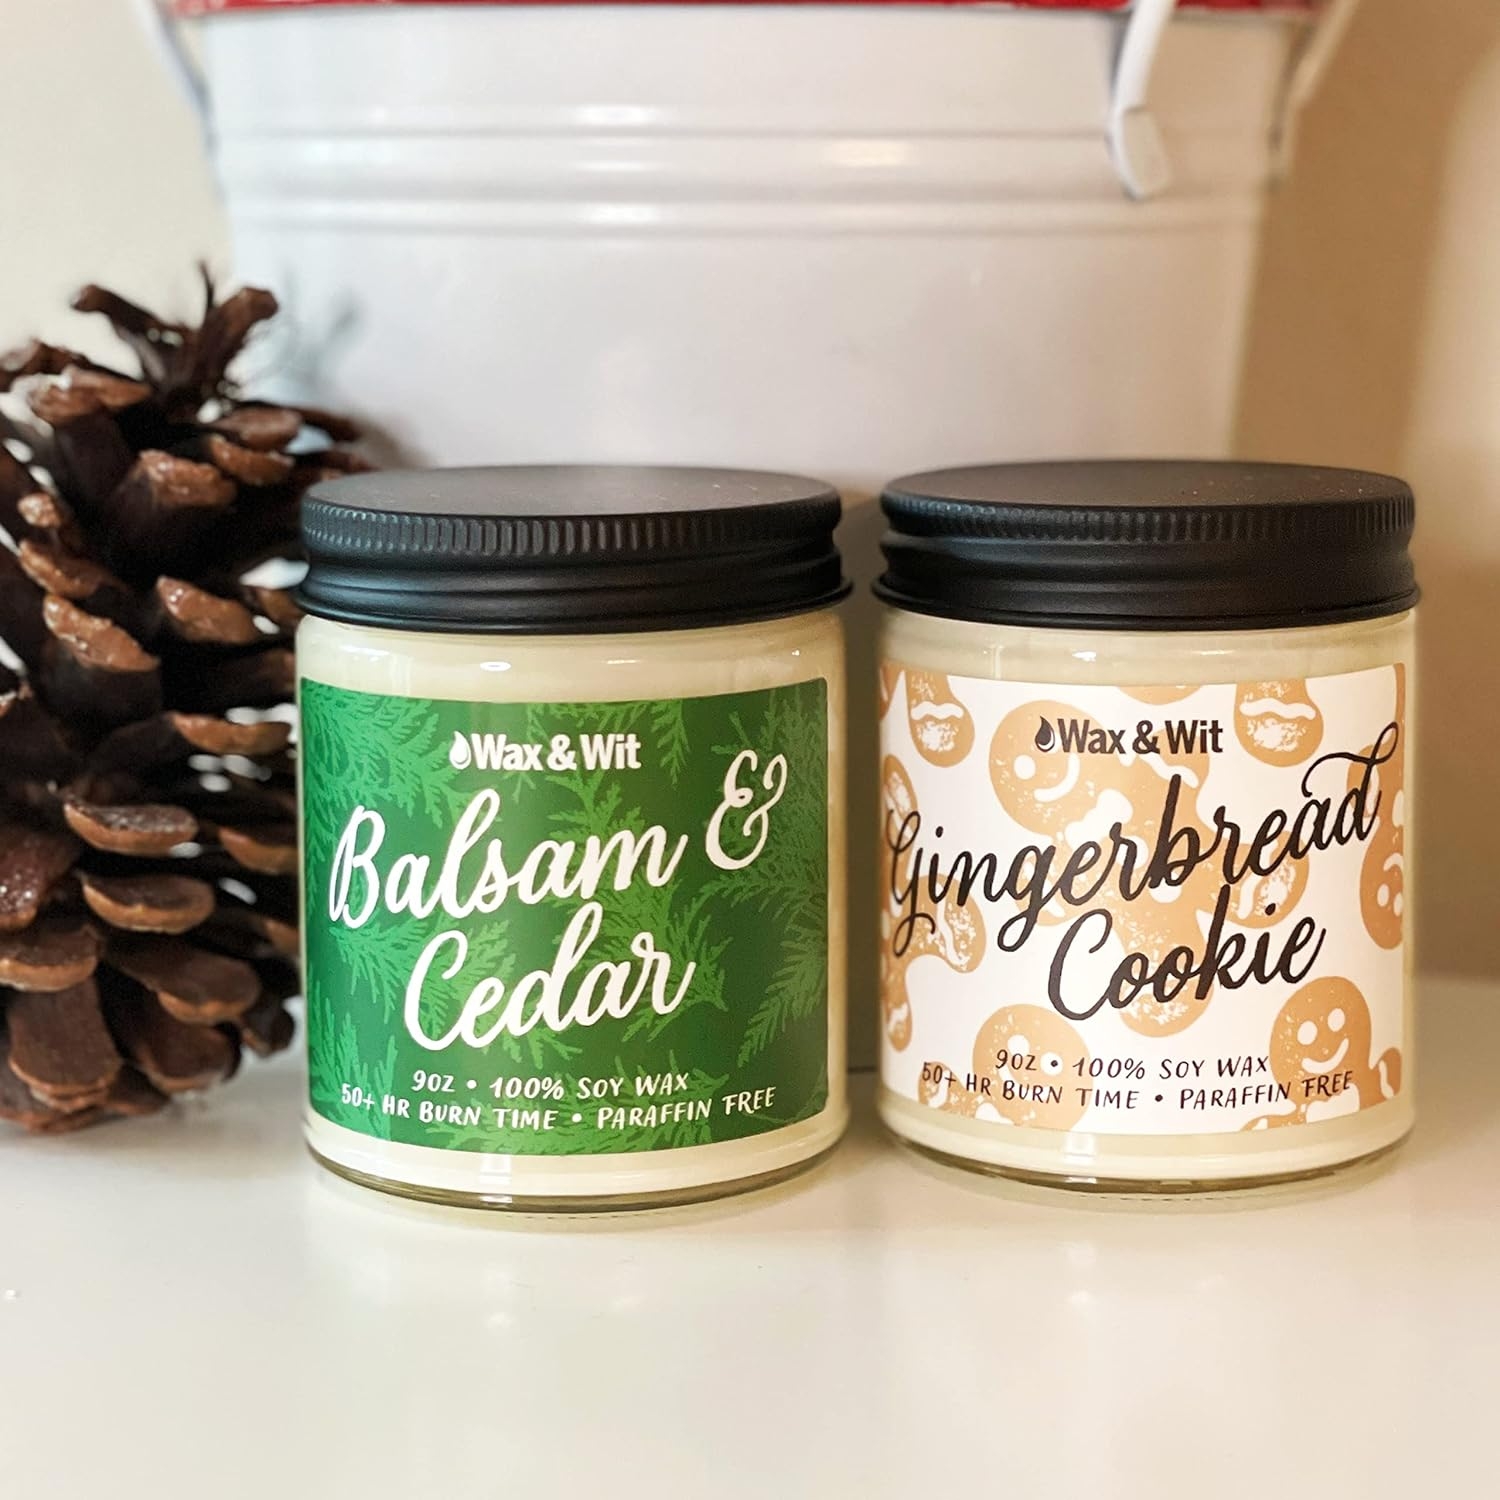 Wax & Wit - Balsam Fir Candle and Gingerbread Cookie Candle Set - Candle Christmas Tree Scent - Candle Holiday - Fall Scented Candles for Home 9oz (2 Pack)